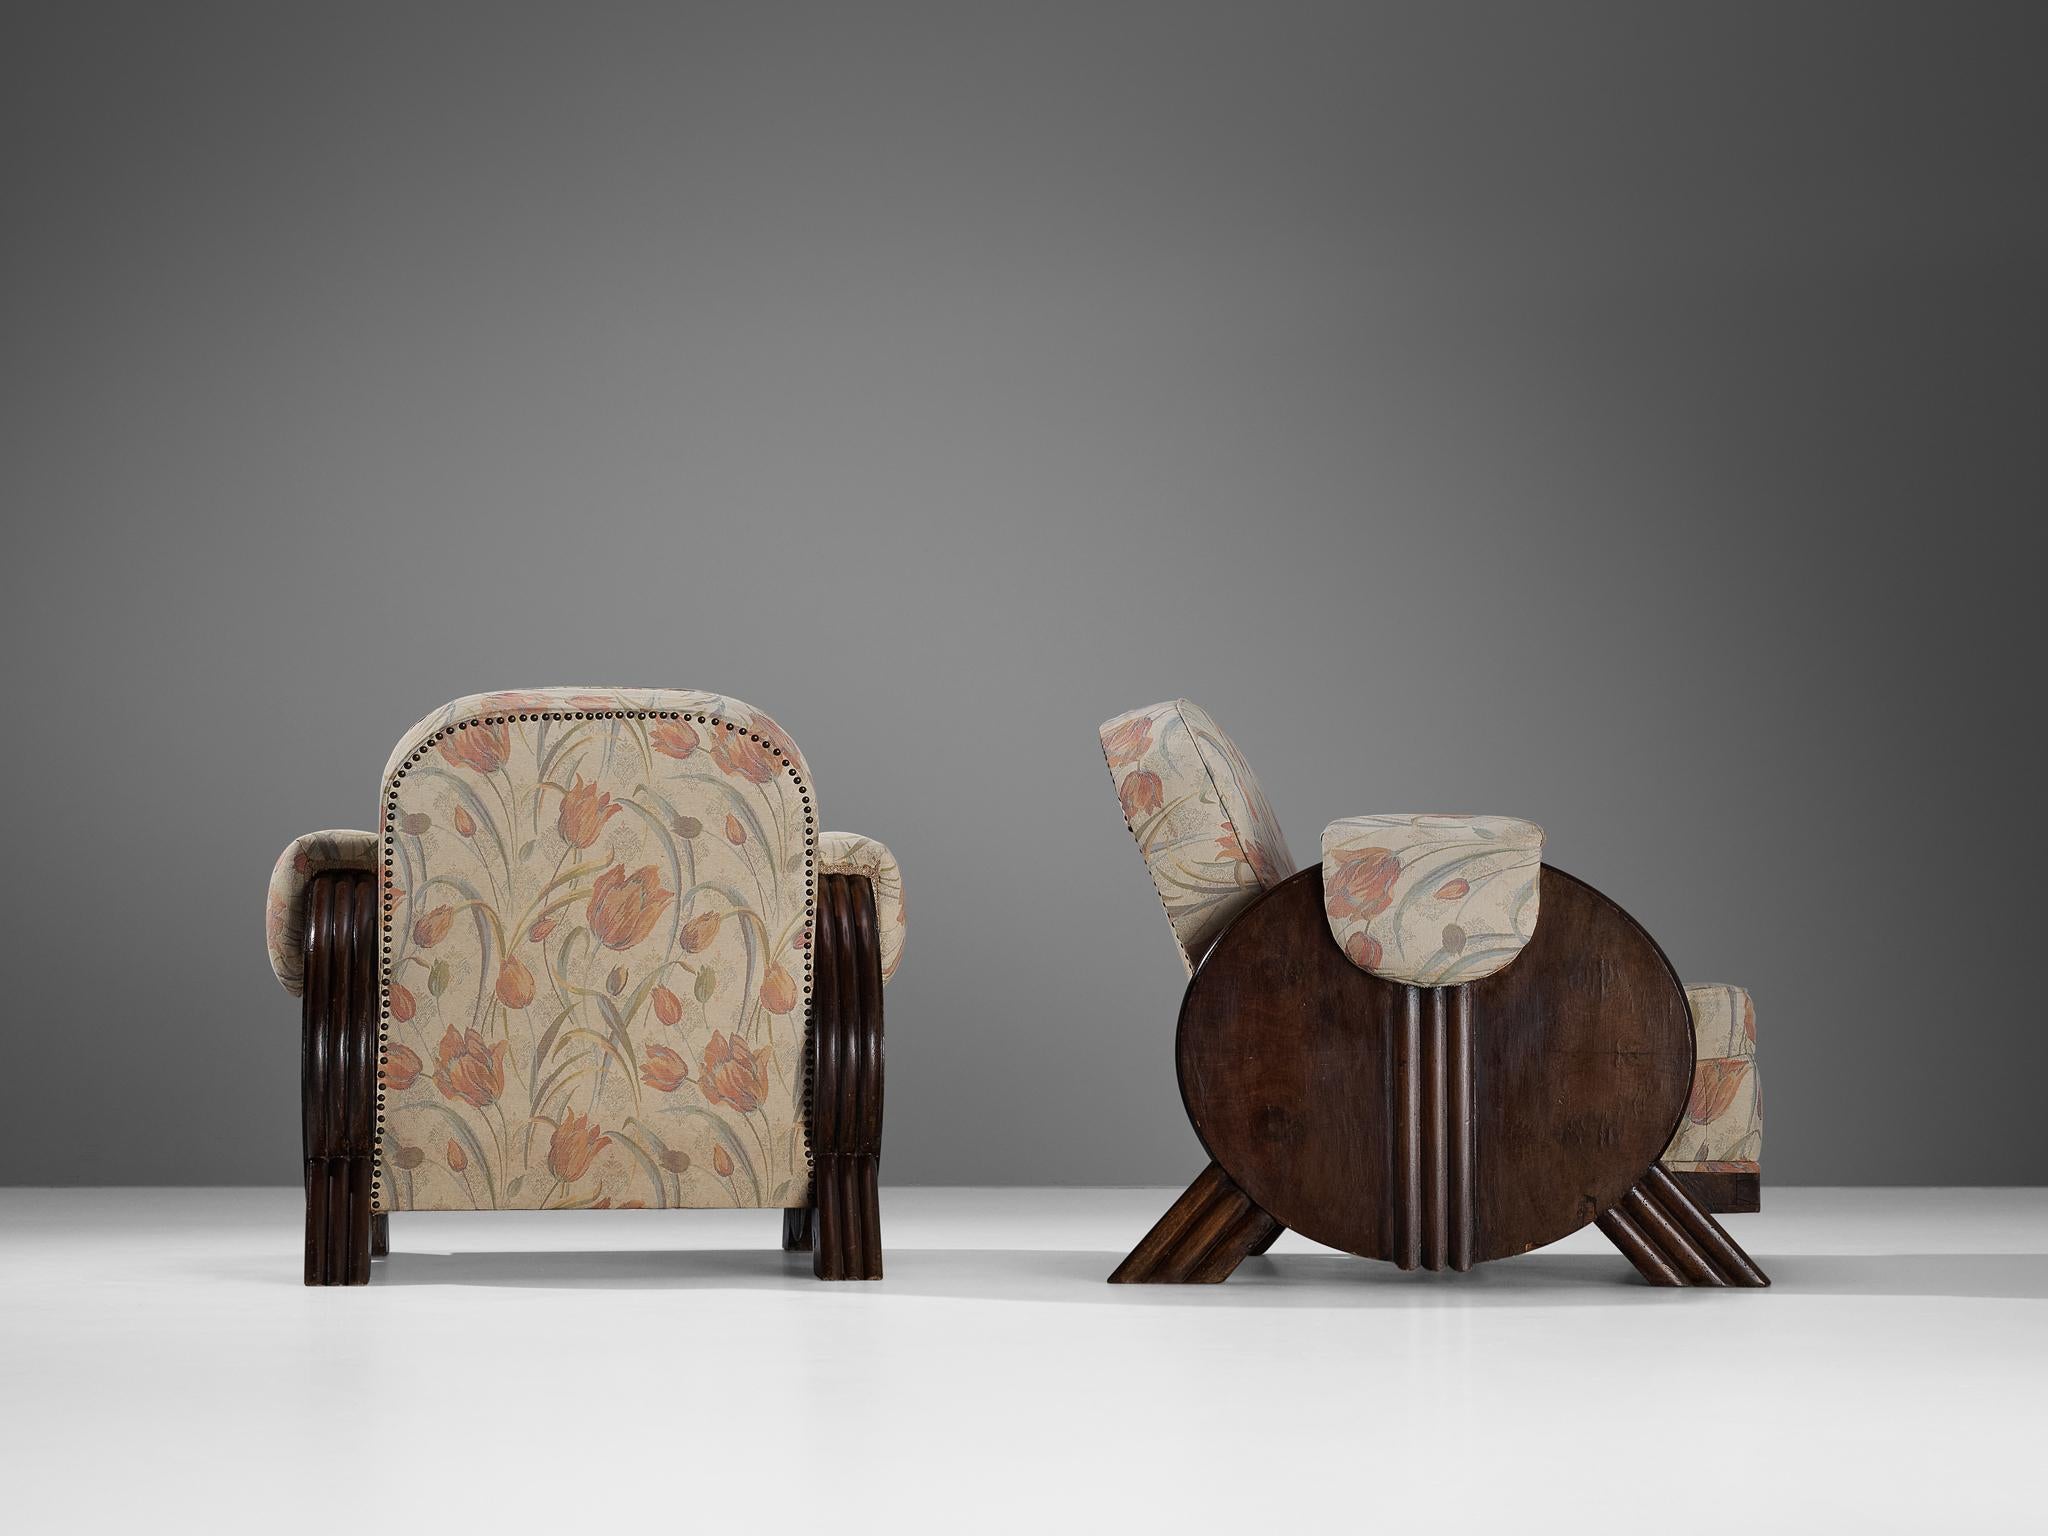 Brass Italian Art Deco Pair of Lounge Chairs in Floral Upholstery and Wood